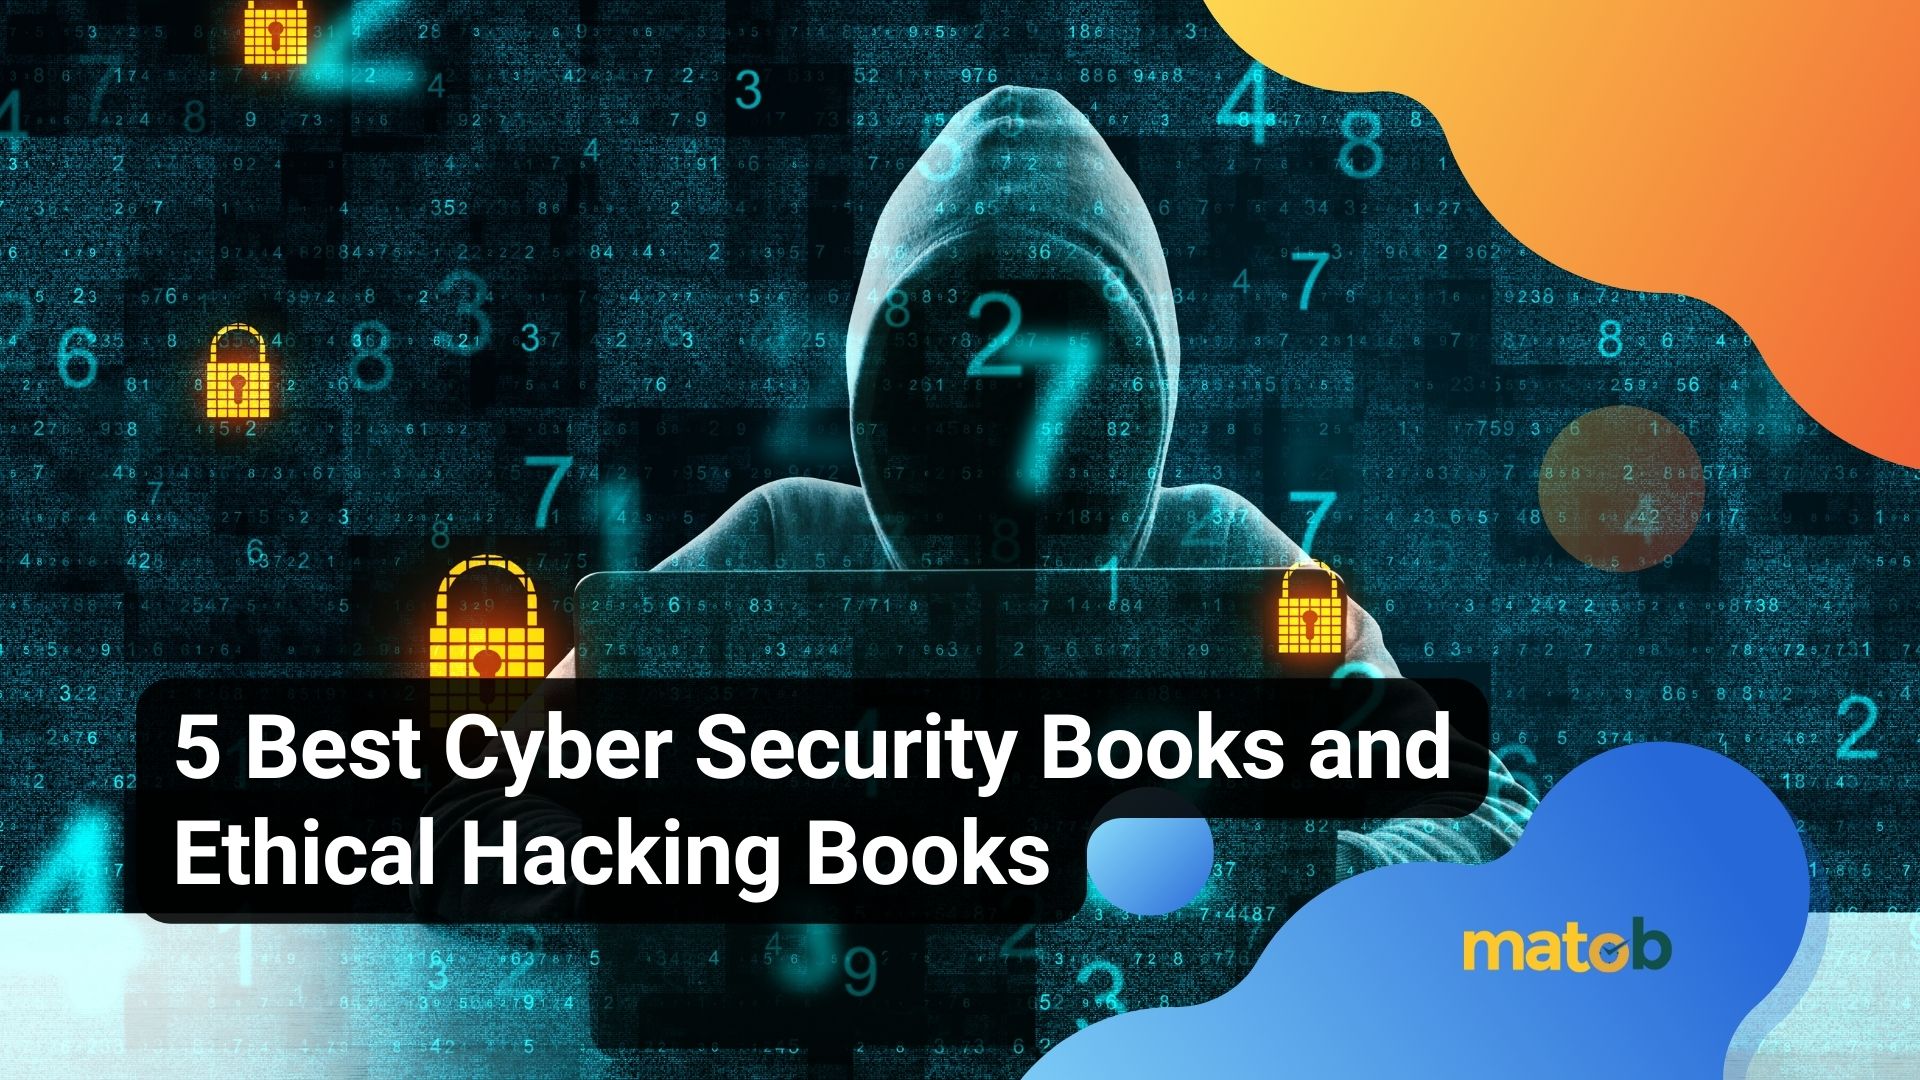 cybersecurity books and ethical hacking books